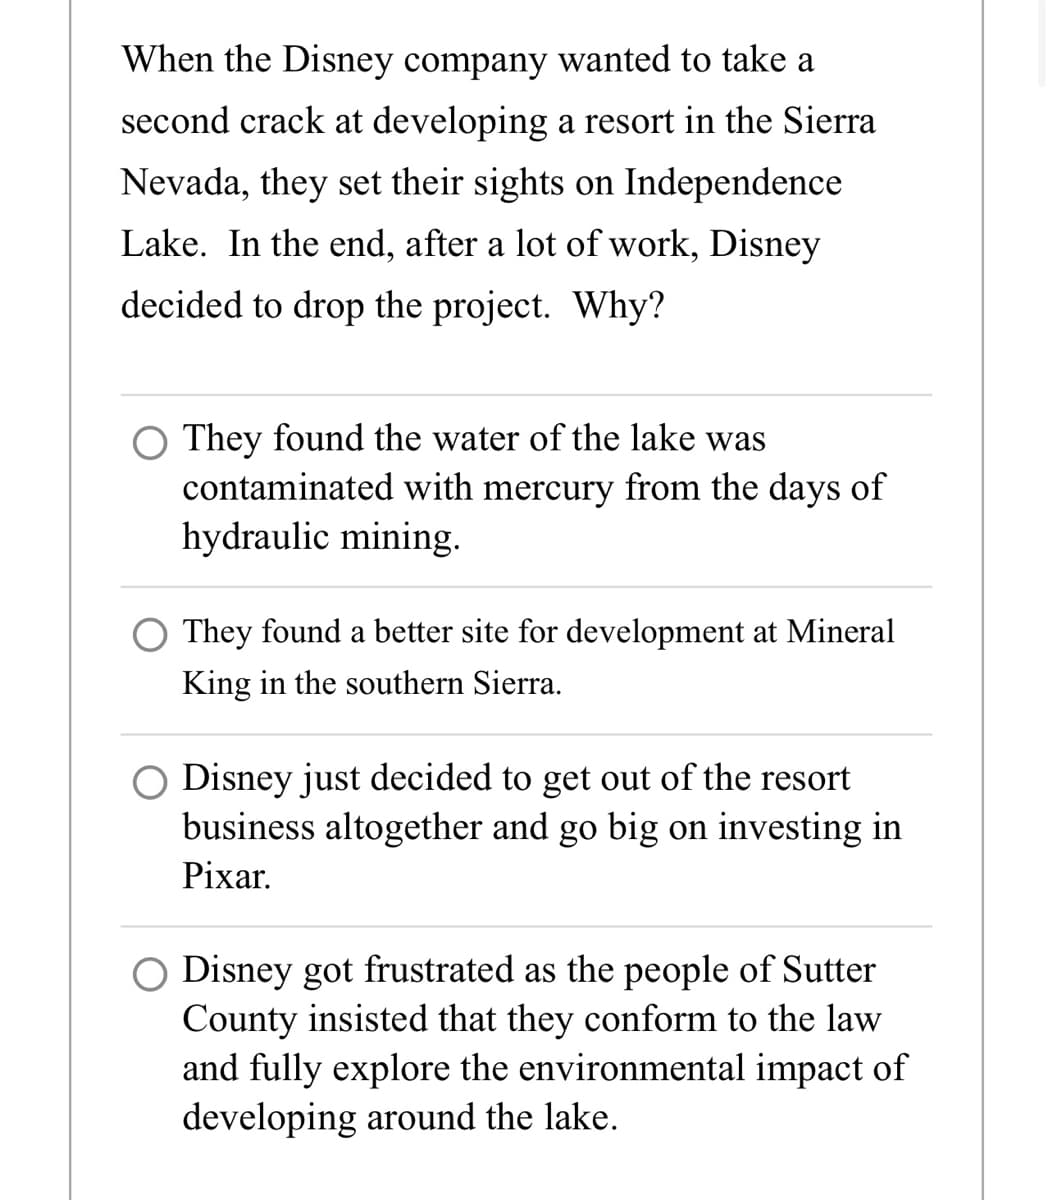 When the Disney company wanted to take a
second crack at developing a resort in the Sierra
Nevada, they set their sights on Independence
Lake. In the end, after a lot of work, Disney
decided to drop the project. Why?
O They found the water of the lake was
contaminated with mercury from the days of
hydraulic mining.
They found a better site for development at Mineral
King in the southern Sierra.
Disney just decided to get out of the resort
business altogether and go big on investing in
Pixar
Disney got frustrated as the people of Sutter
County insisted that they conform to the law
and fully explore the environmental impact of
developing around the lake.